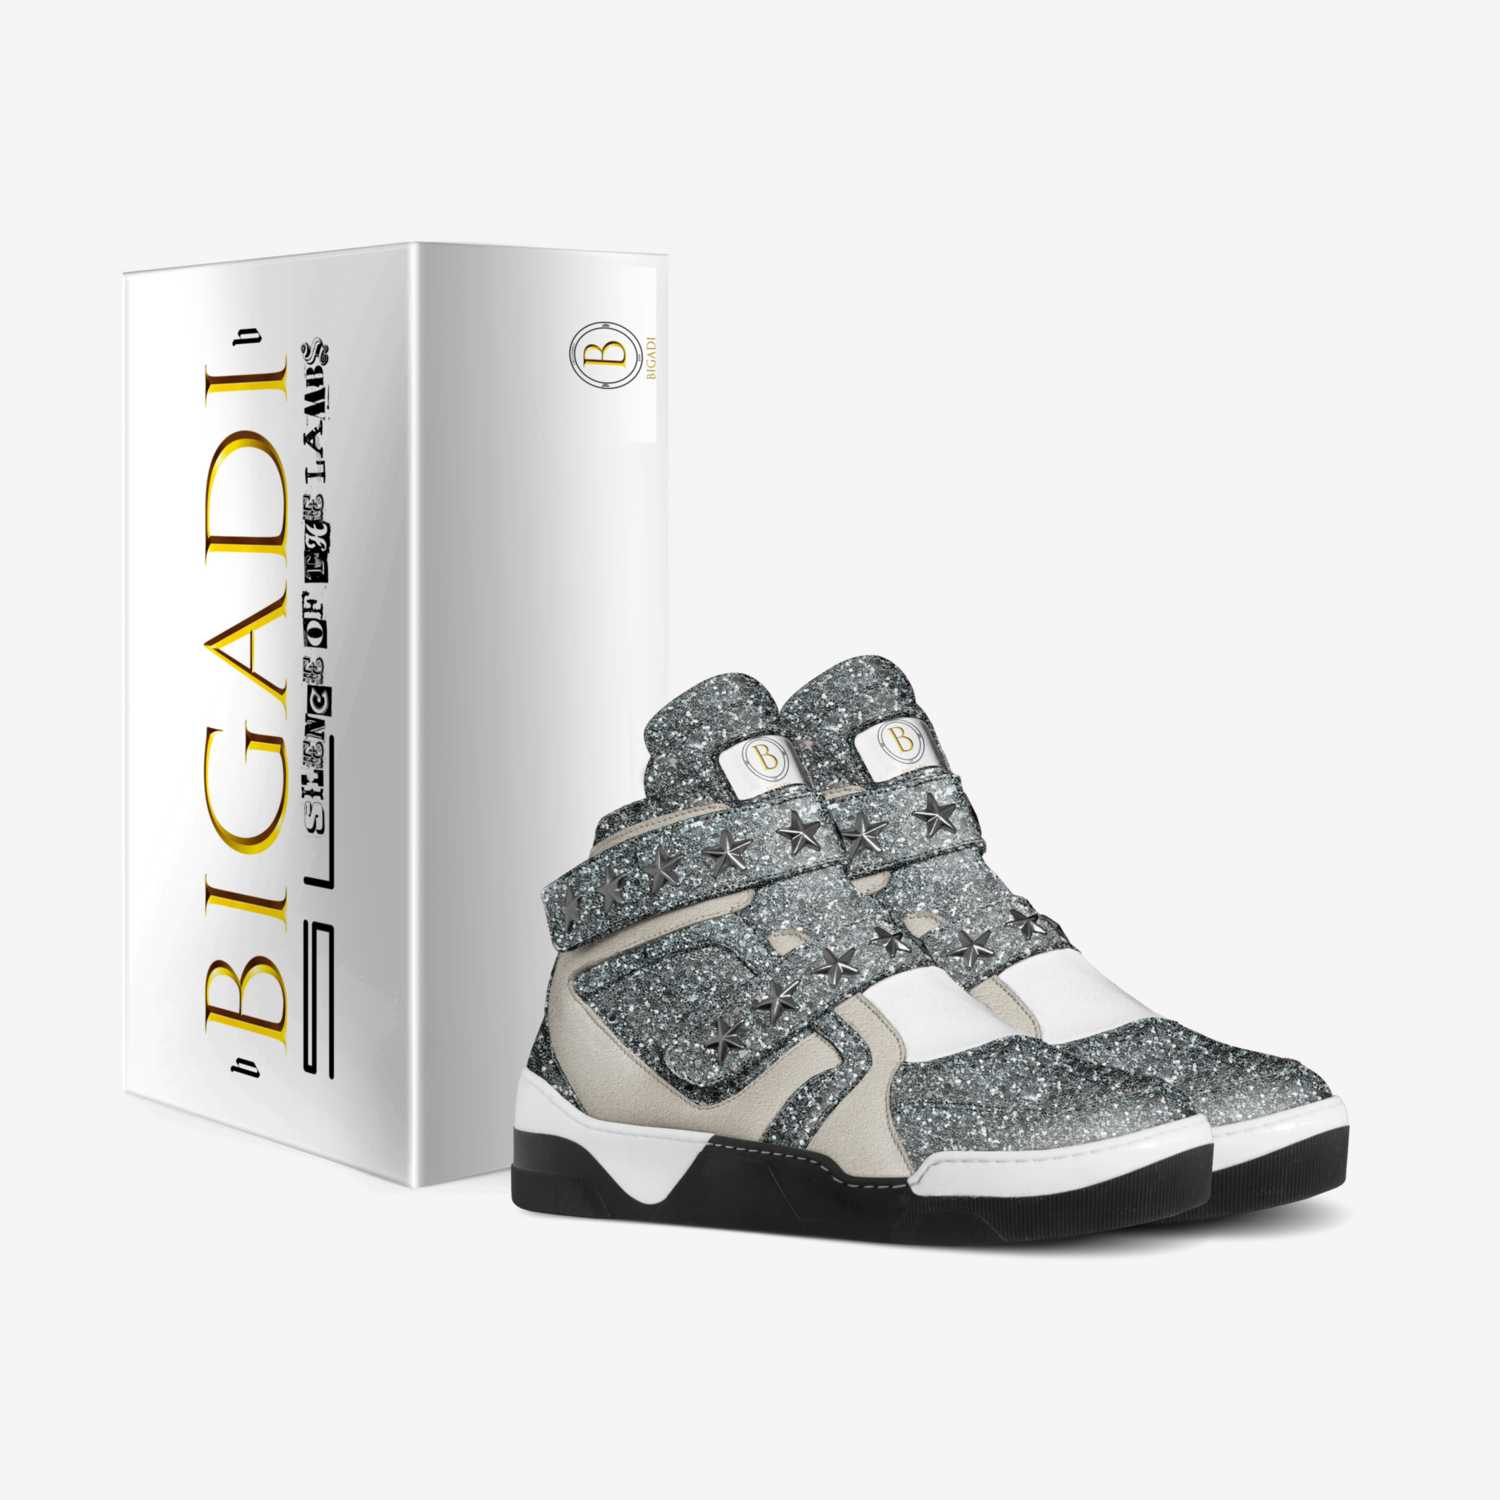 Bigadi SL custom made in Italy shoes by Christopher Ford | Box view